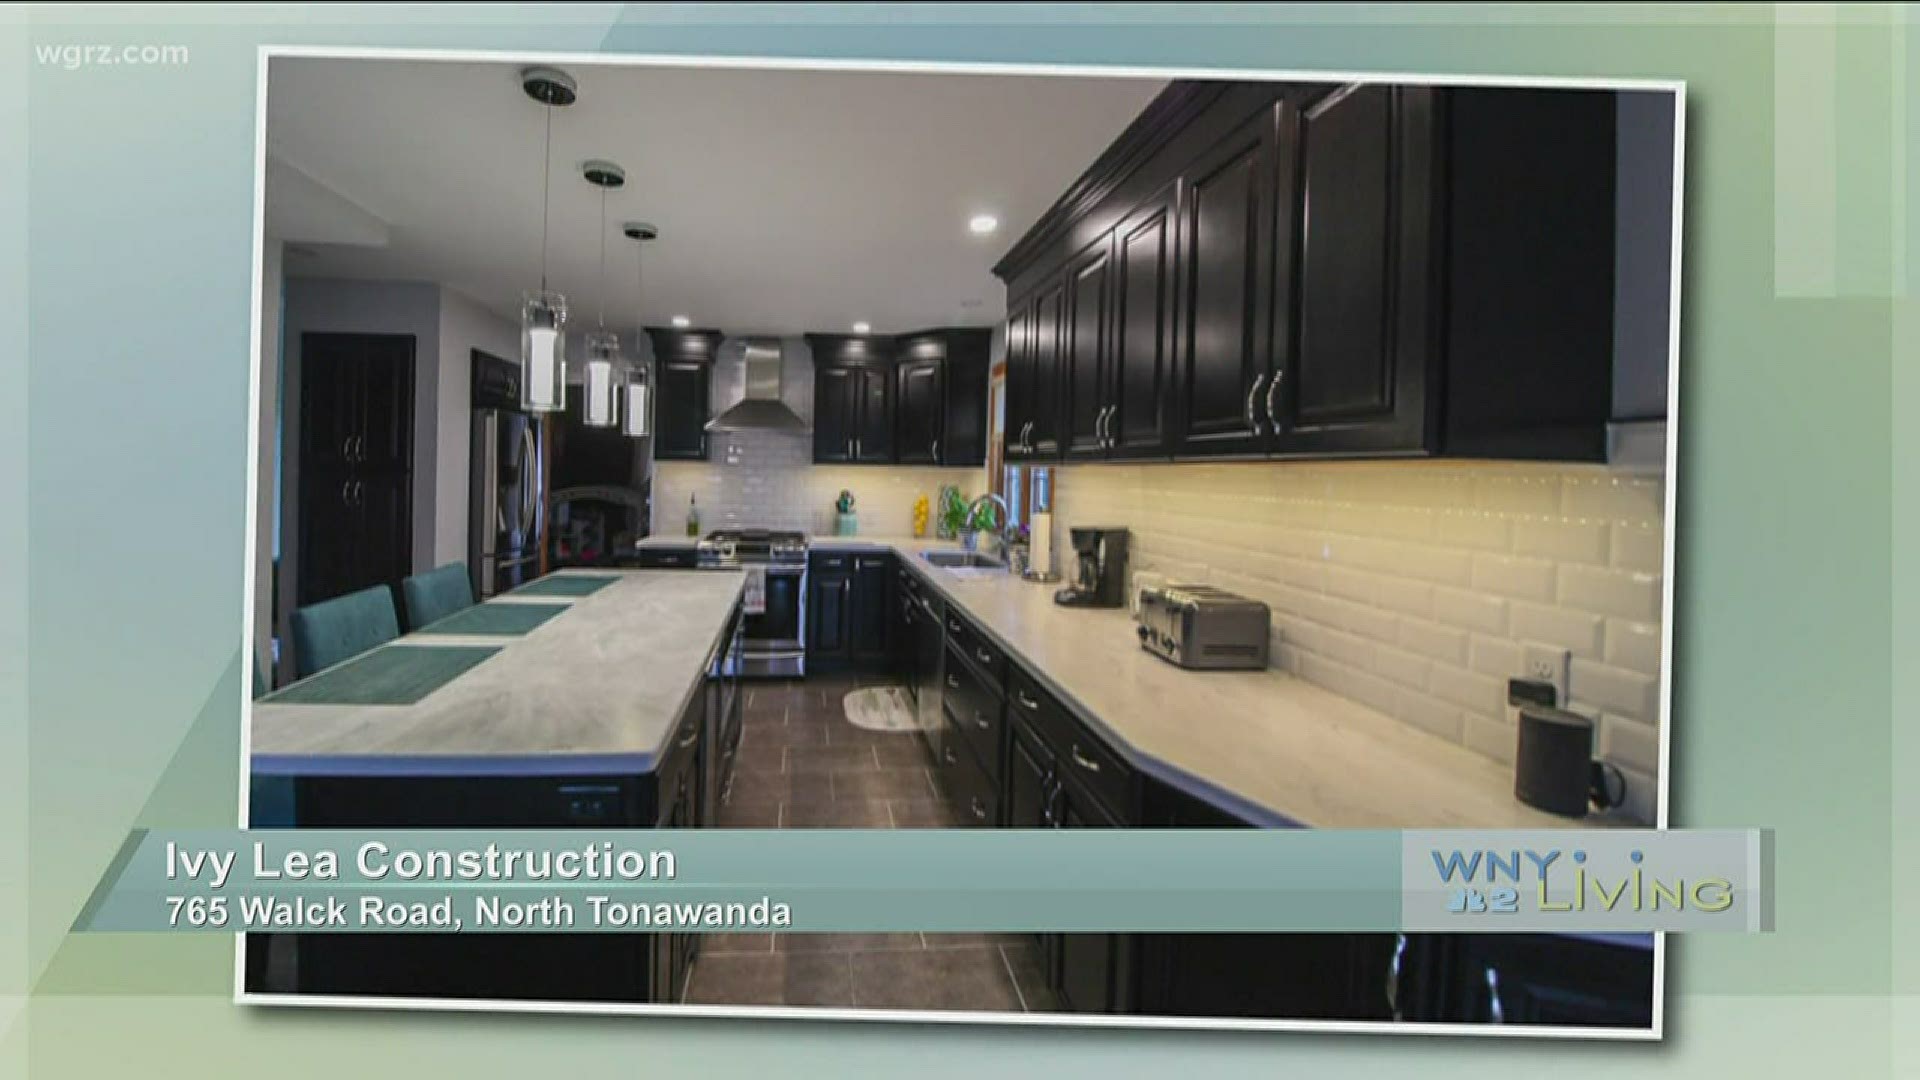 WNY Living - July 25 - Ivy Lea Construction (THIS VIDEO IS SPONSORED BY IVY LEA CONSTRUCTION)